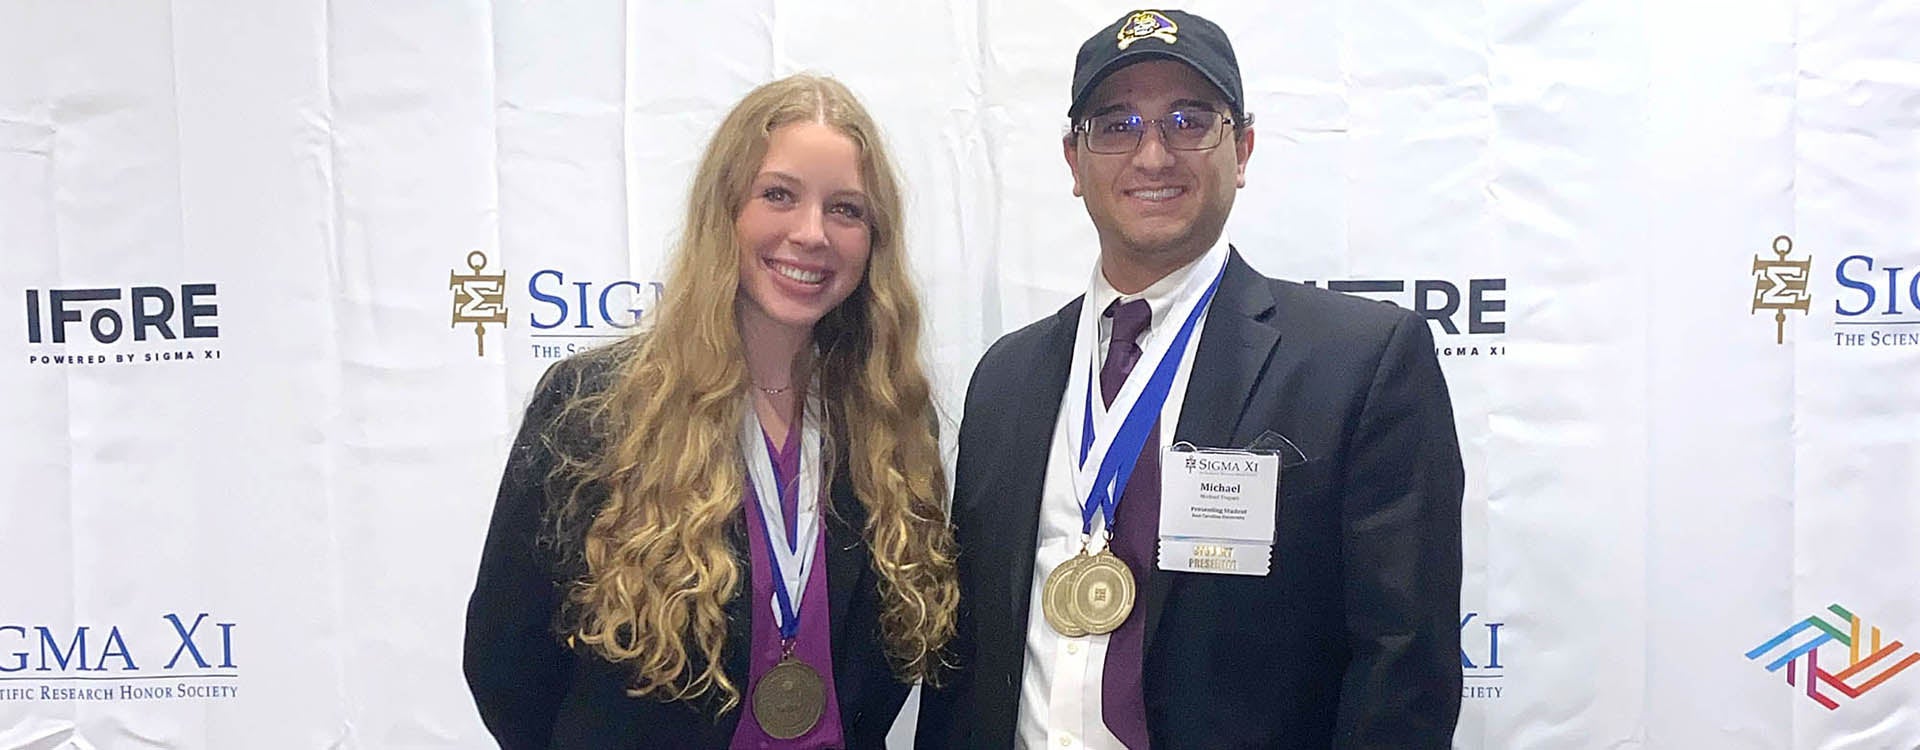 Danielle Werts and Michael Trapani show off their medals from the International Forum on Research Excellence. (Contributed photo)